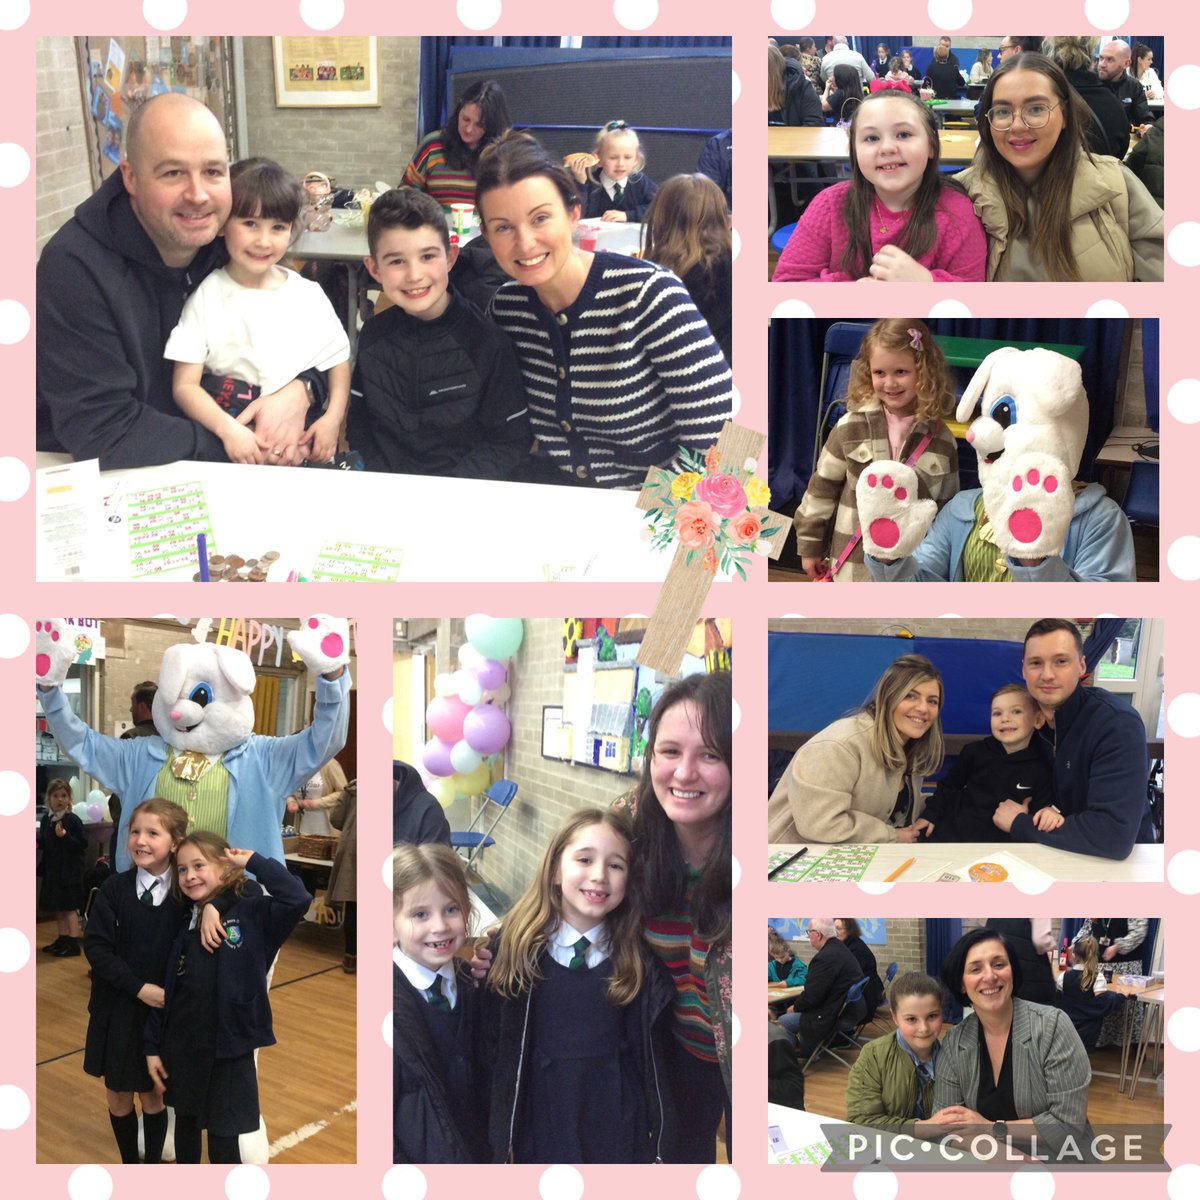 We all had a wonderful time at Easter Bingo last night! We were very ‘egg-cited’ to meet the Easter  Bunny! #schoolfundraising #Easterbingo